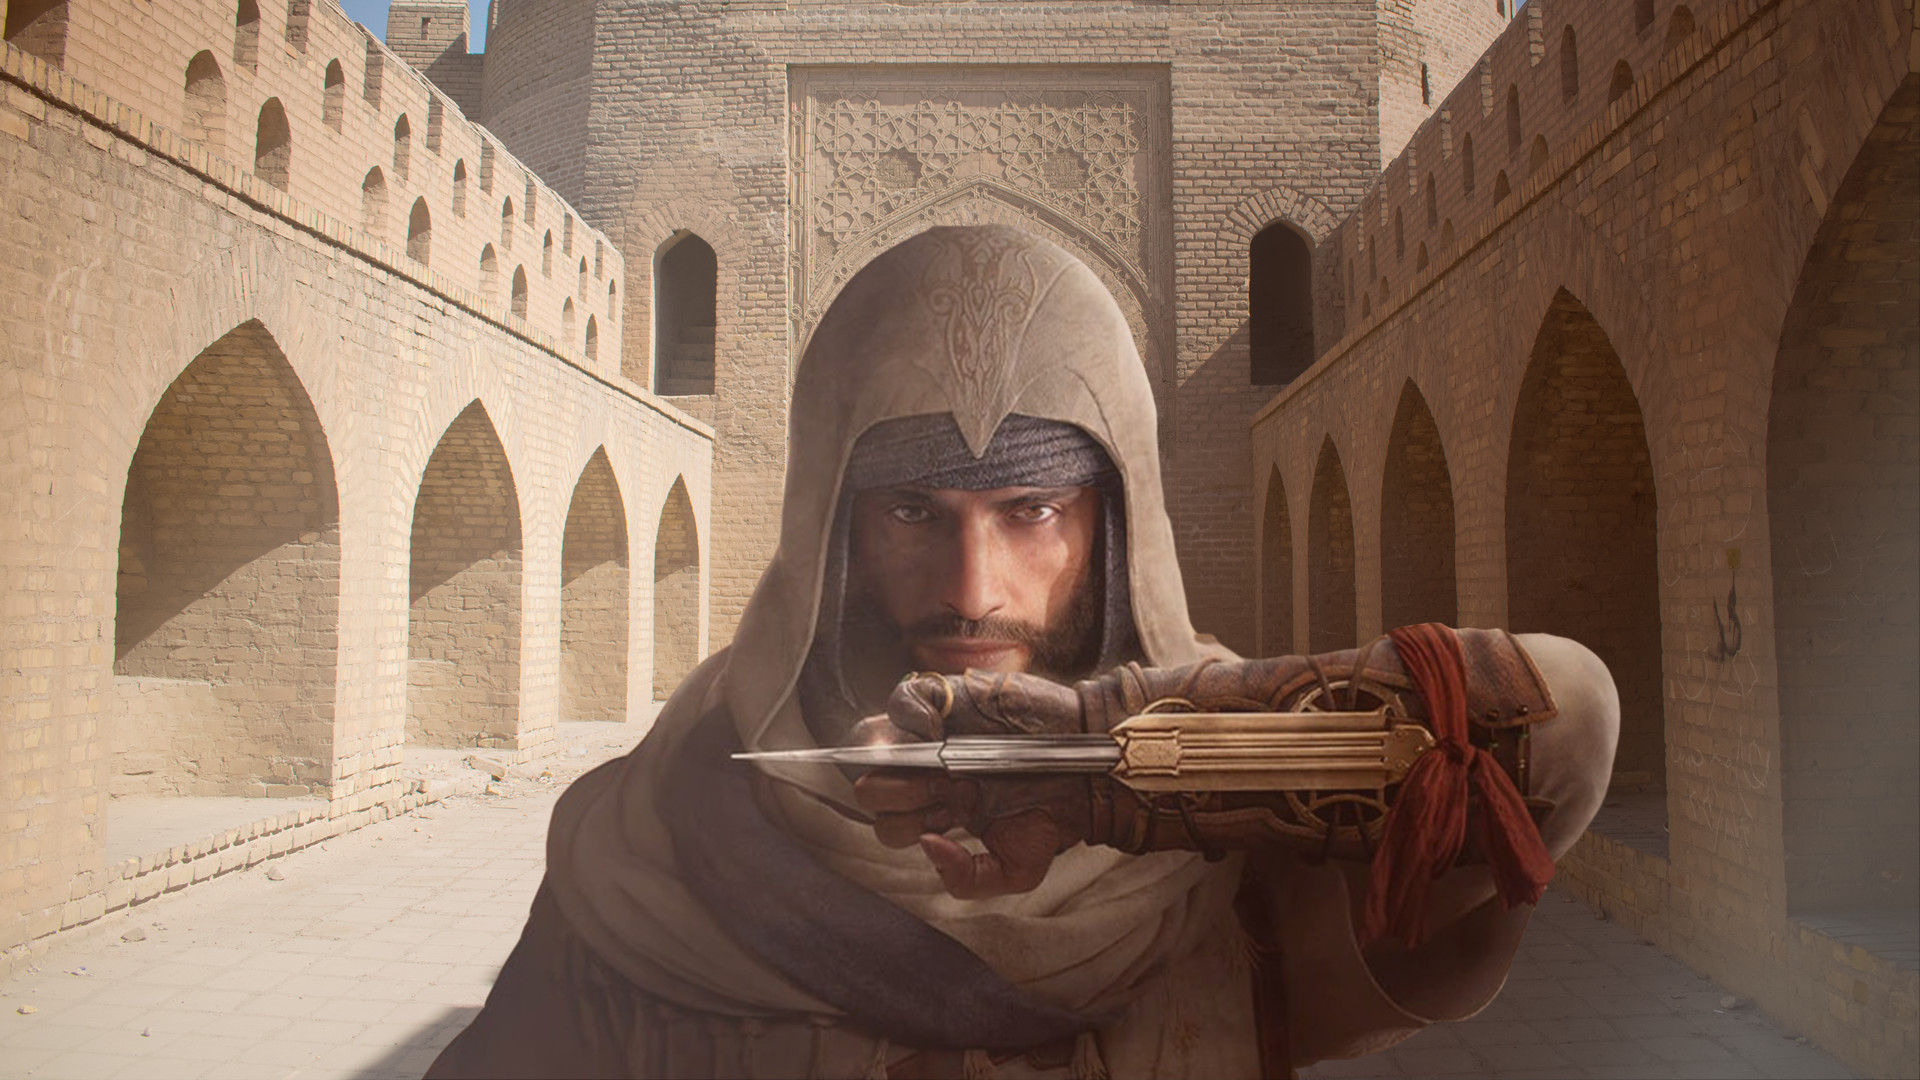 How Long to Beat Assassin's Creed Mirage? Answered